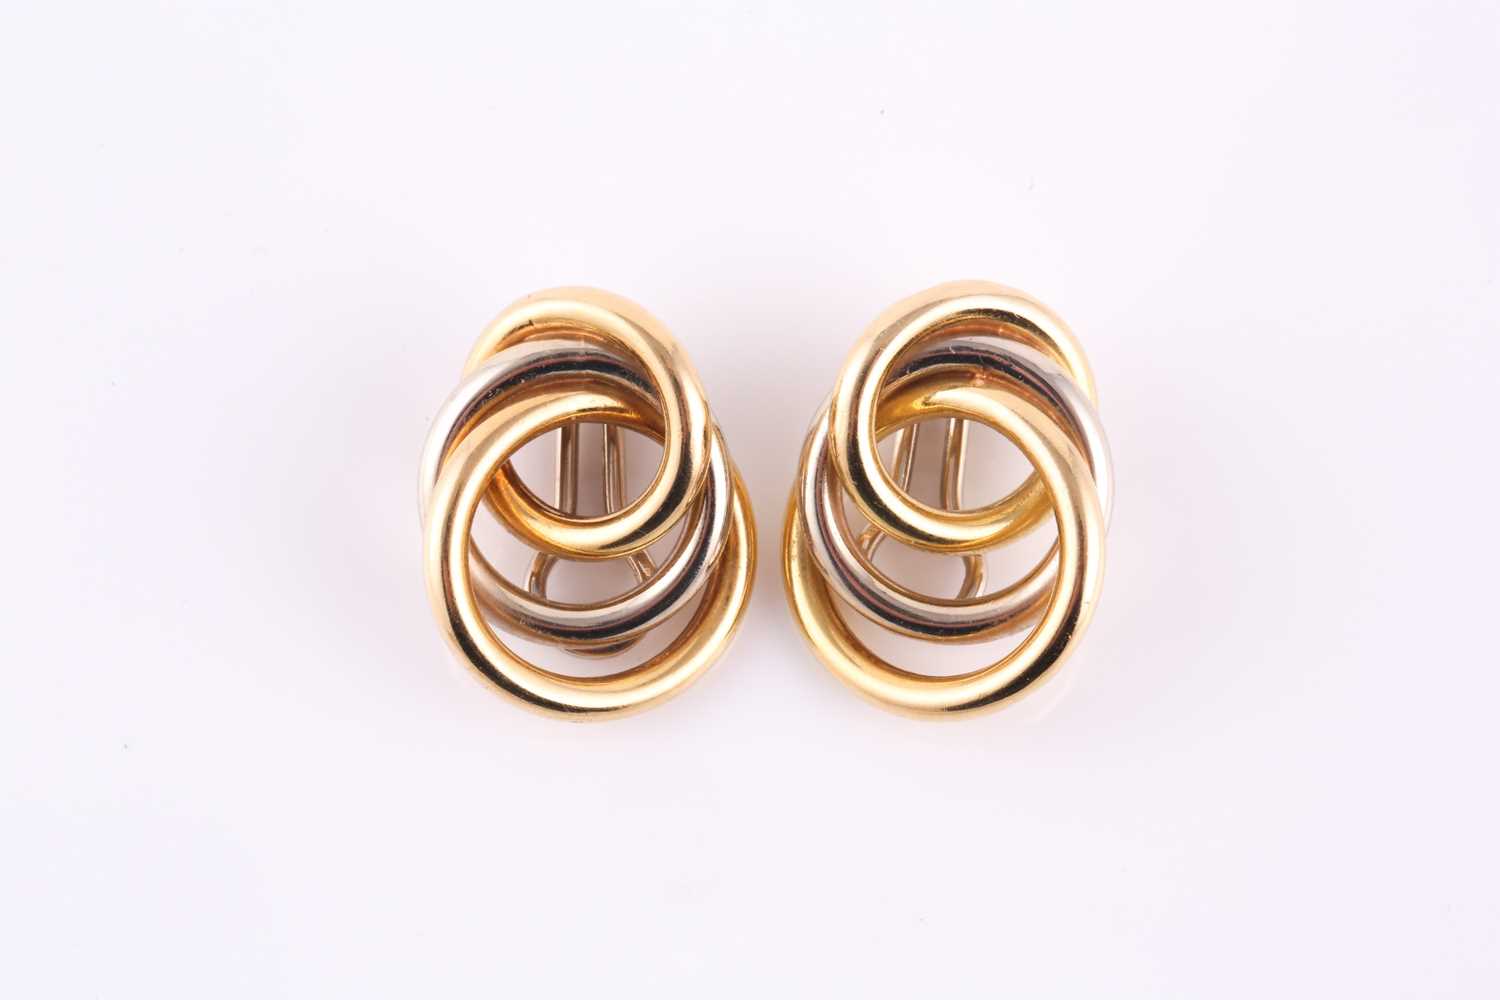 A pair of solid knot earrings, made from yellow and white metal loops stamped 'Italy K18' with